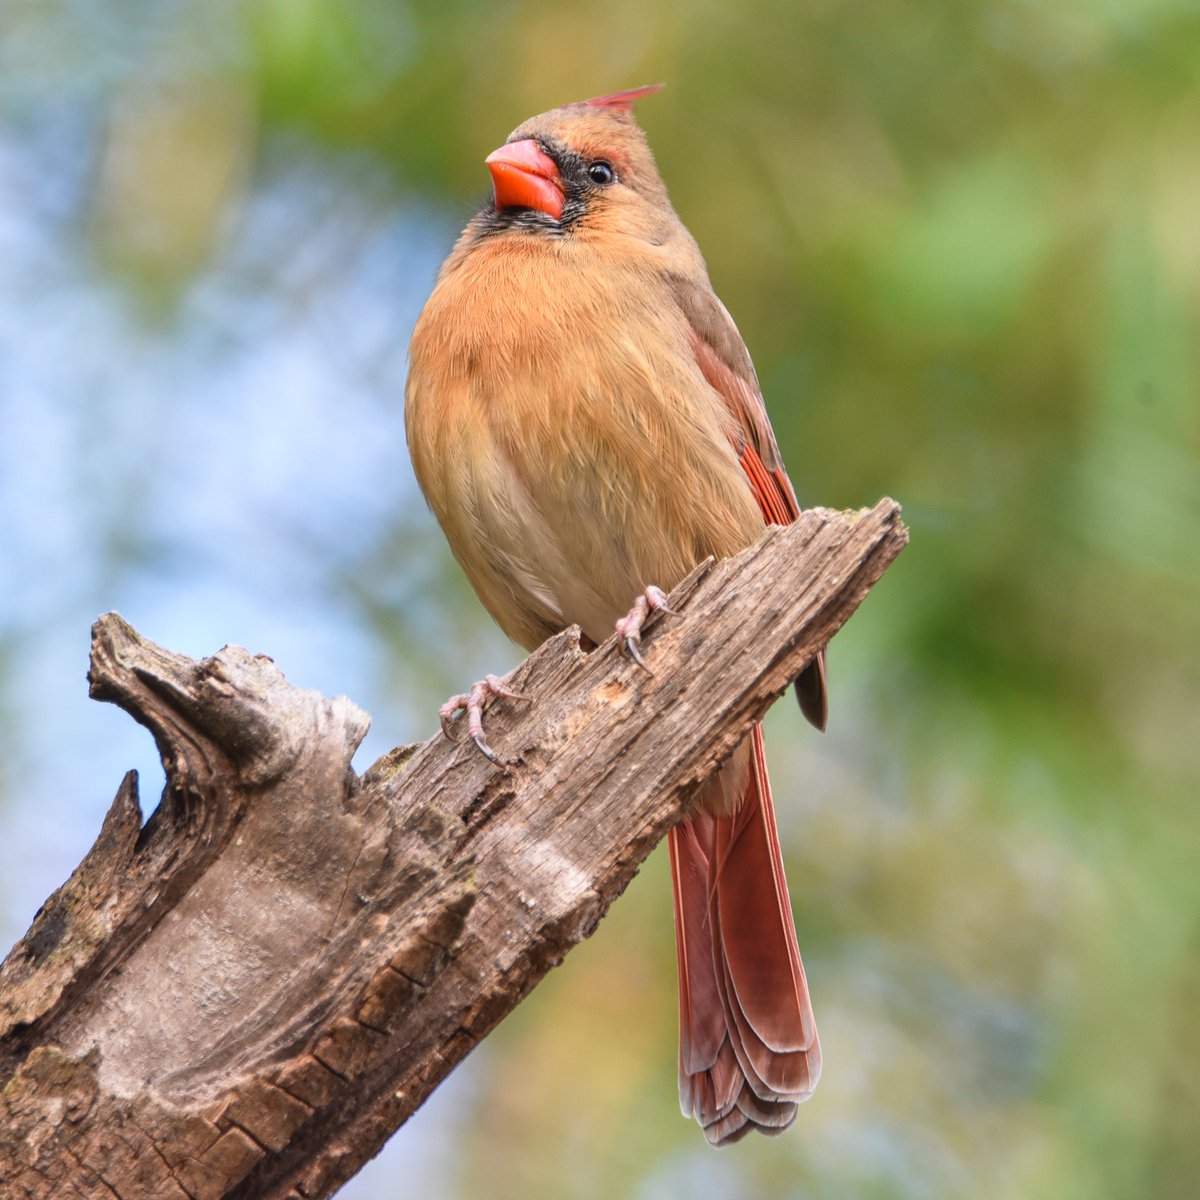 The opinionated Cardinal assumes the Pose of The All Knowing.

#your_best_birds #marvelouz_animals_ #joyful_pics
#total_birds #kings_birds
#made_nature_pics #world_bestanimal #onfire_animals #onfire_wildnature #kings_animals_love #ok_animals #asi_es_fauna
 #stupefying_animals